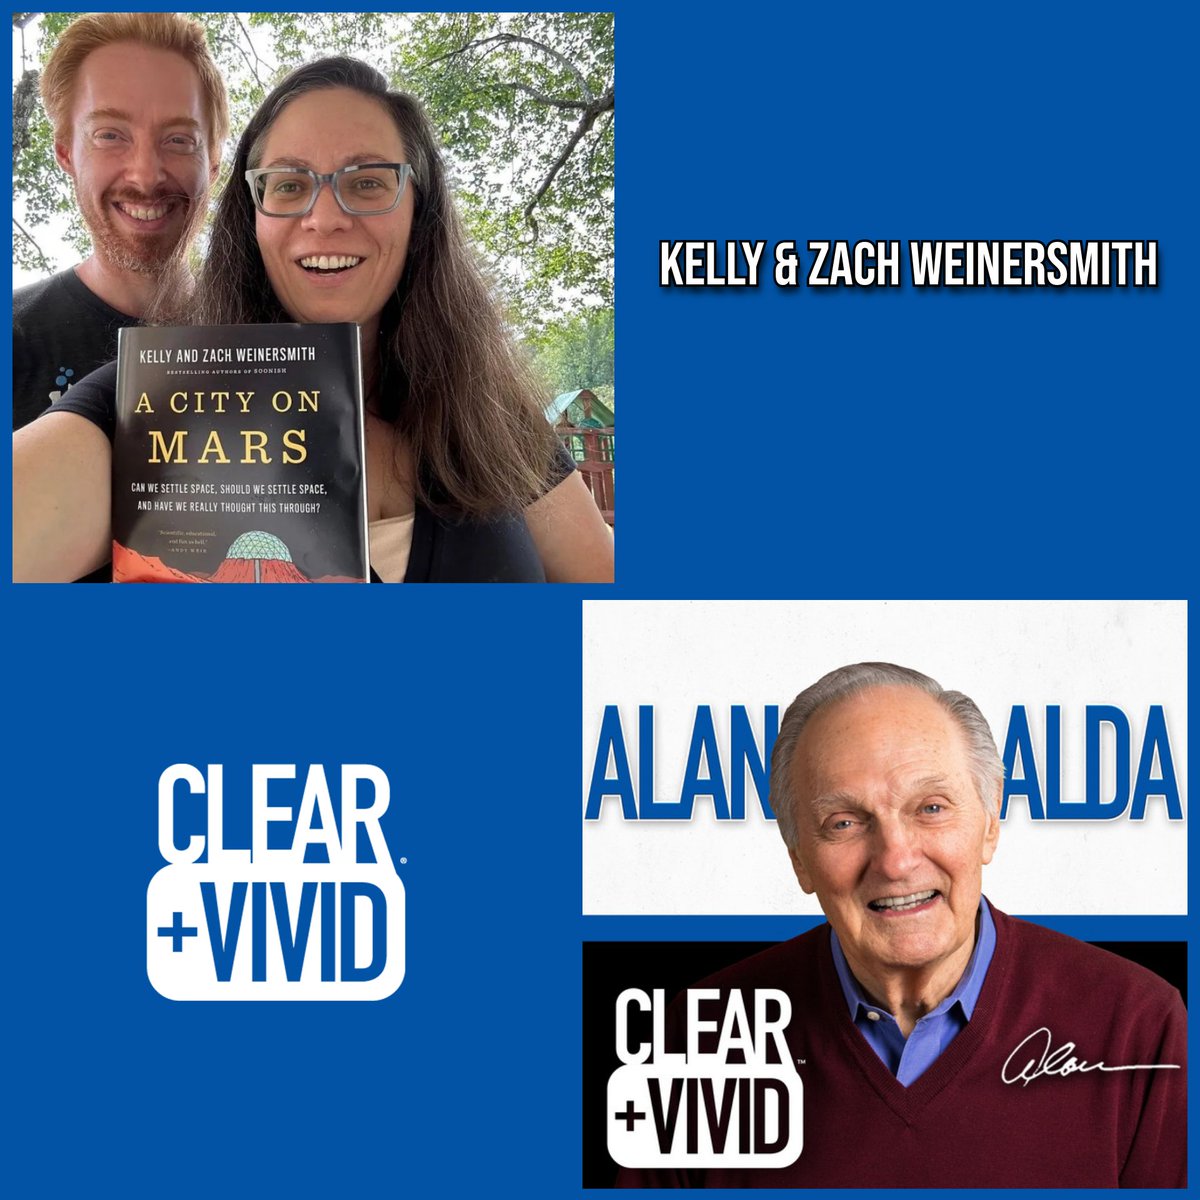 Tomorrow is PODCAST DAY! @AlanAlda chats with @FuSchmu & @ZachWeiner. An unlikely husband and wife duo has spent years digging deeply into plans to colonize space. 👉bit.ly/3tR21Gs After production costs, all proceeds of Clear+Vivid go to The @AldaCenter.